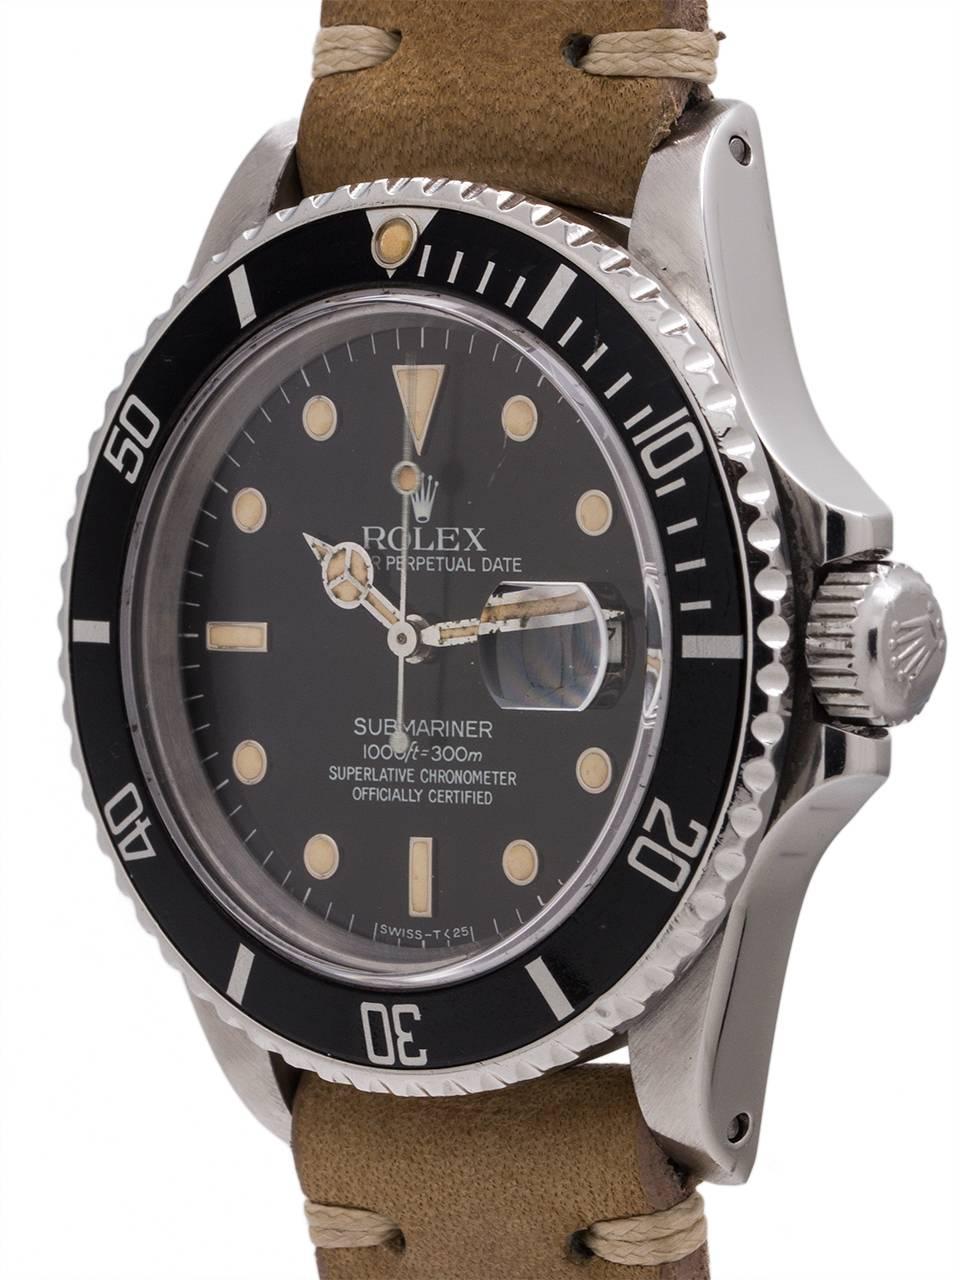 
Rolex Submariner ref 16800 transitional model serial# 9.3 million circa 1986 with glossy black dial with richly patina’d luminous indexes, hands, and pearl. This is the popular transitional model with sapphire crystal, quickset date calibre 3035